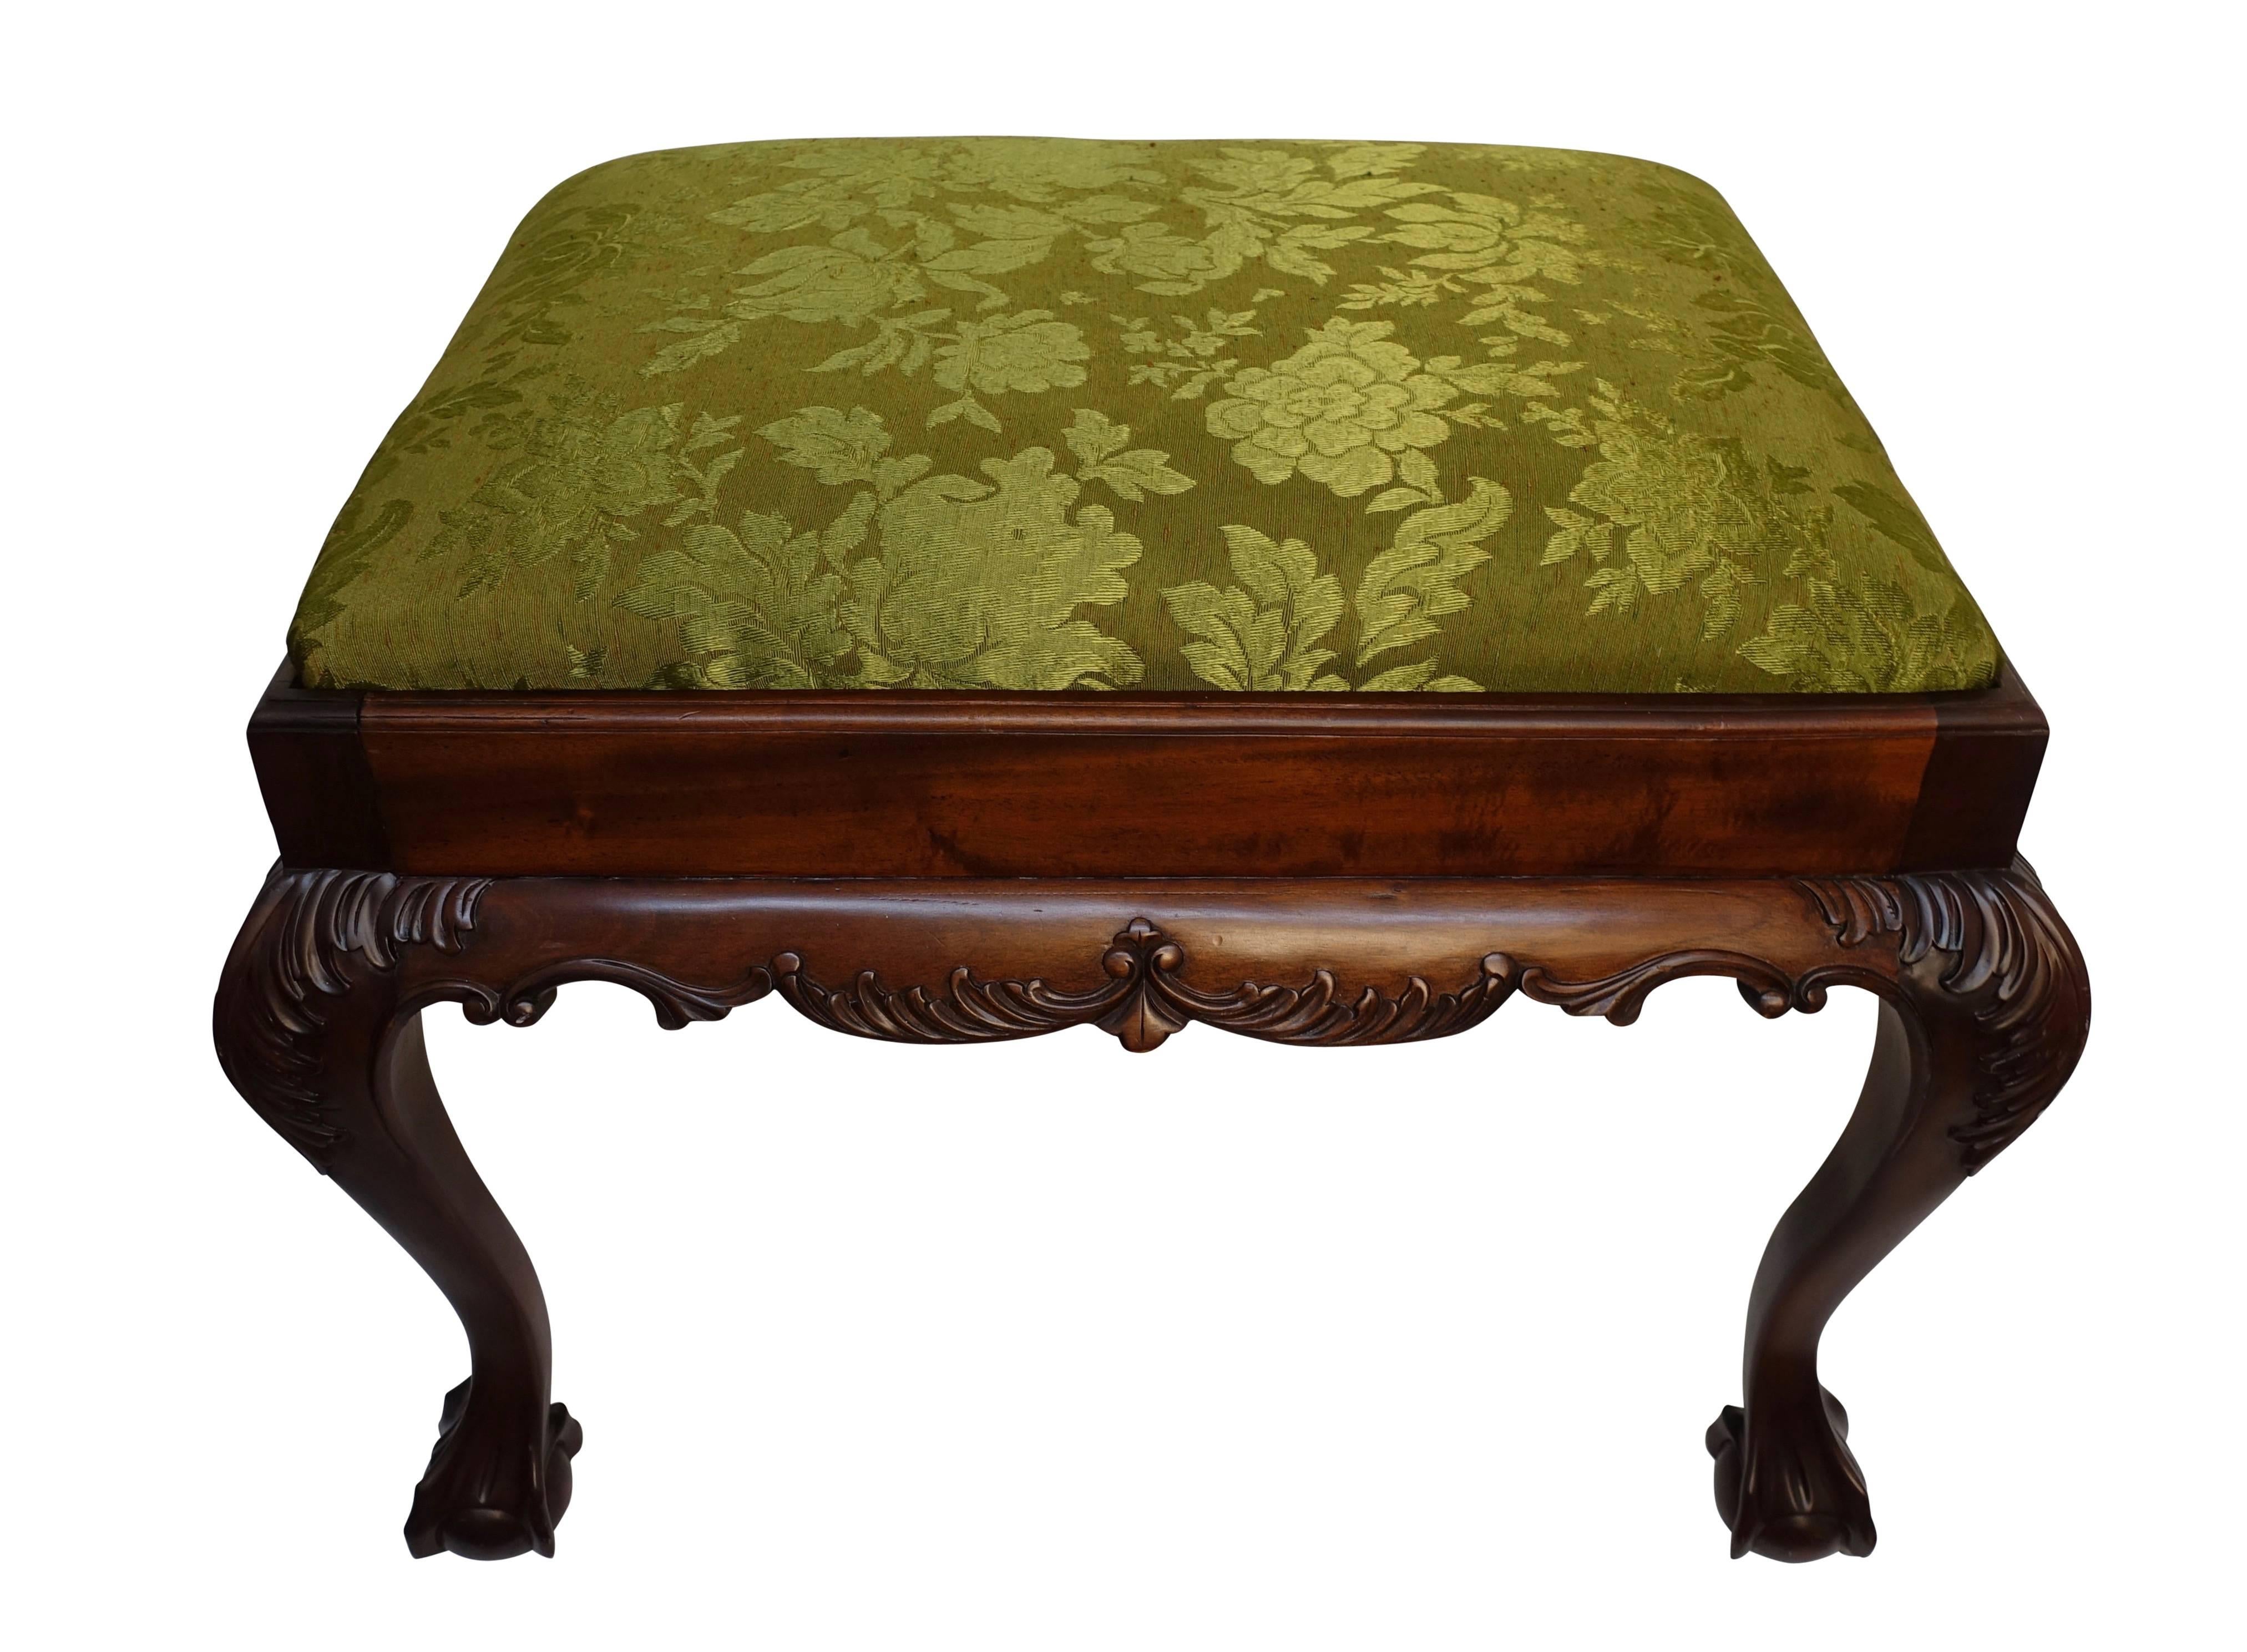 Chippendale style mahogany bench or stool with claw and ball feet, and having carved acanthus leaf carvings on the knees, England, first half of the 20th century.